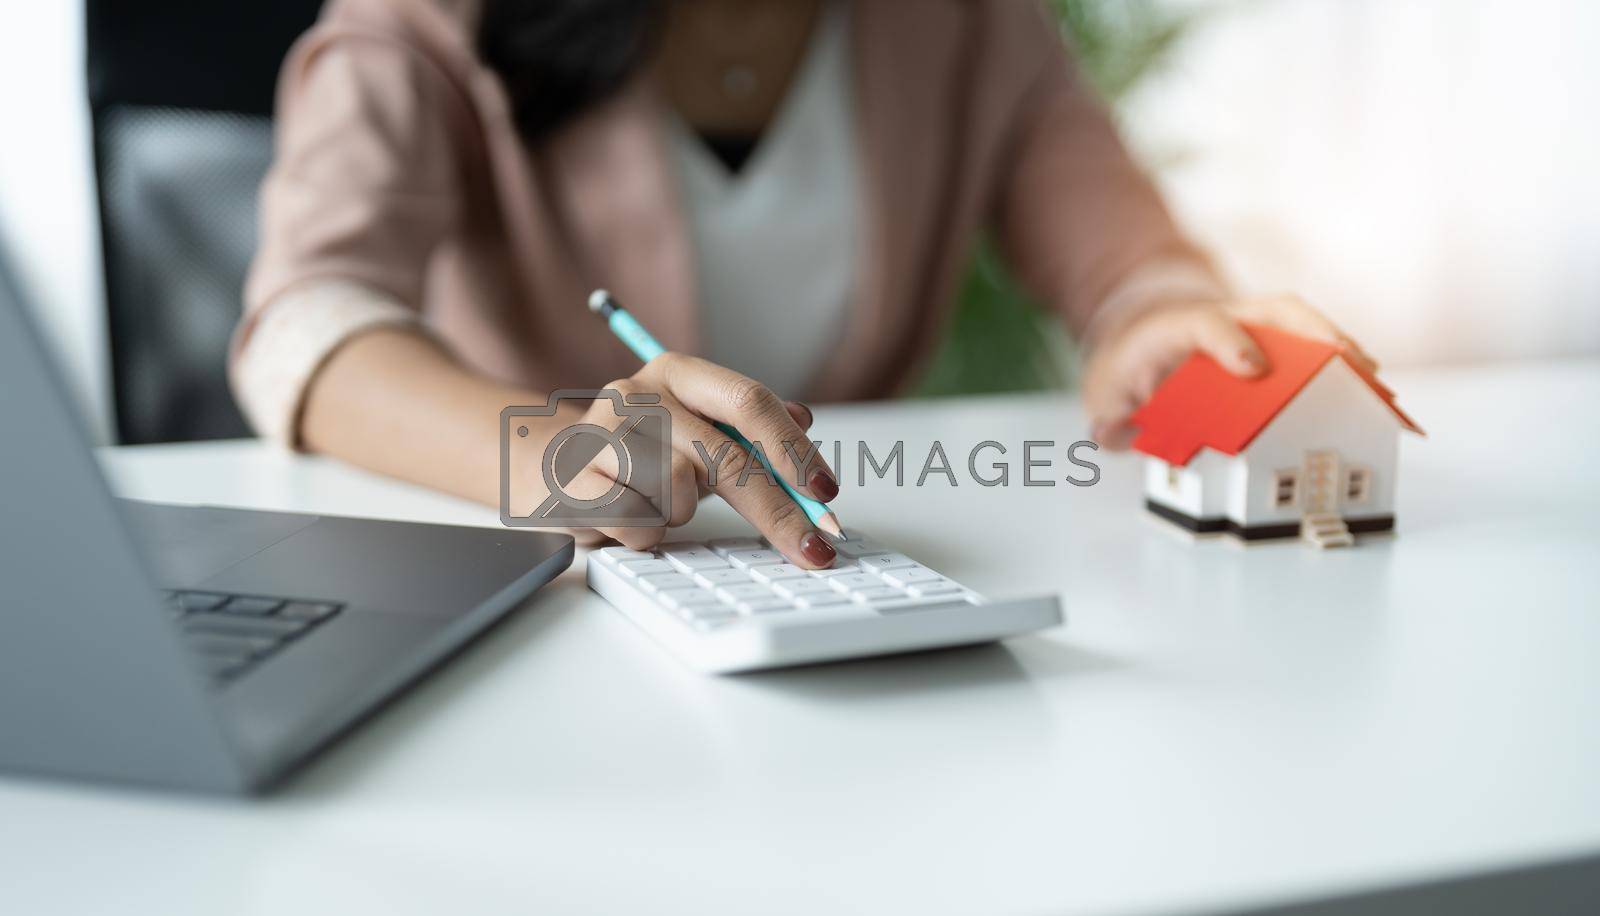 Royalty free image of Hand of Business woman calculating interest, taxes and profits to invest in real estate and home buying by nateemee